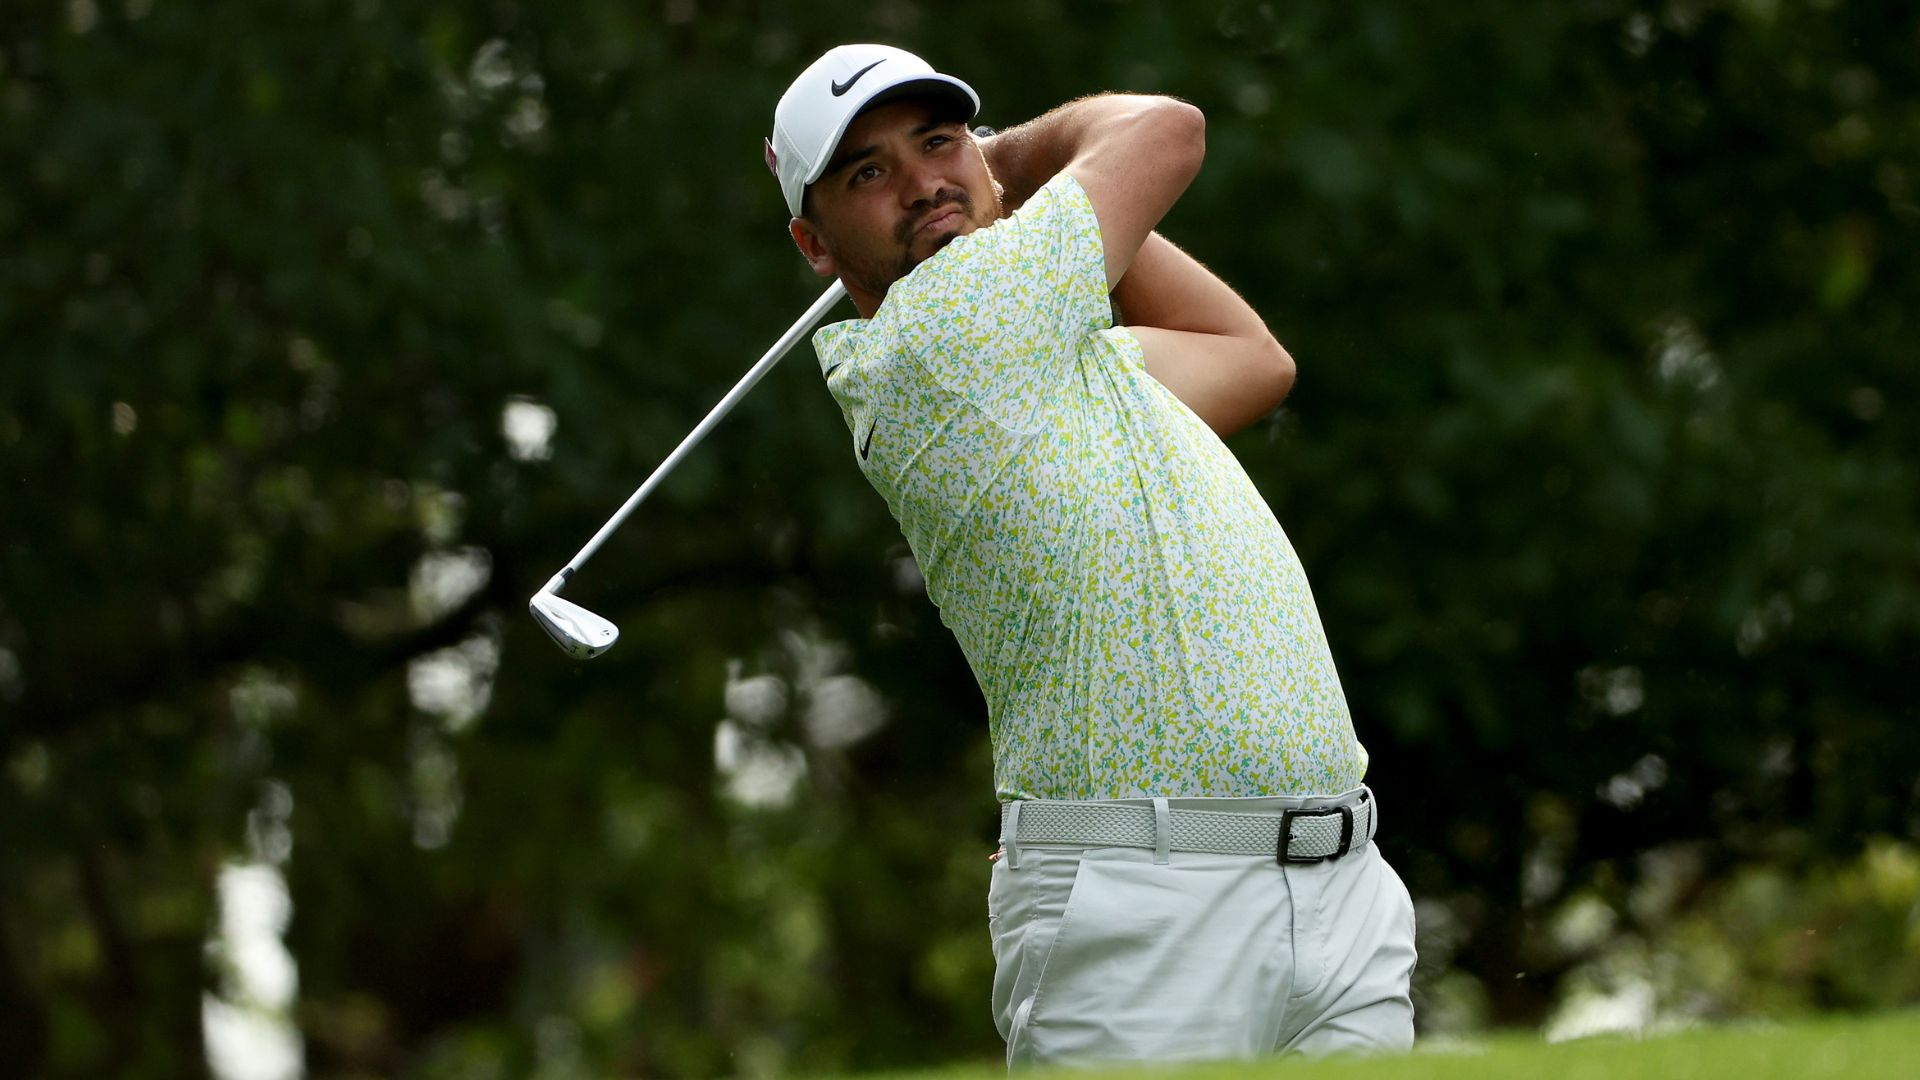 Double bogey on No. 15 kills Jason Day’s momentum in Round 2 of 2023 Masters